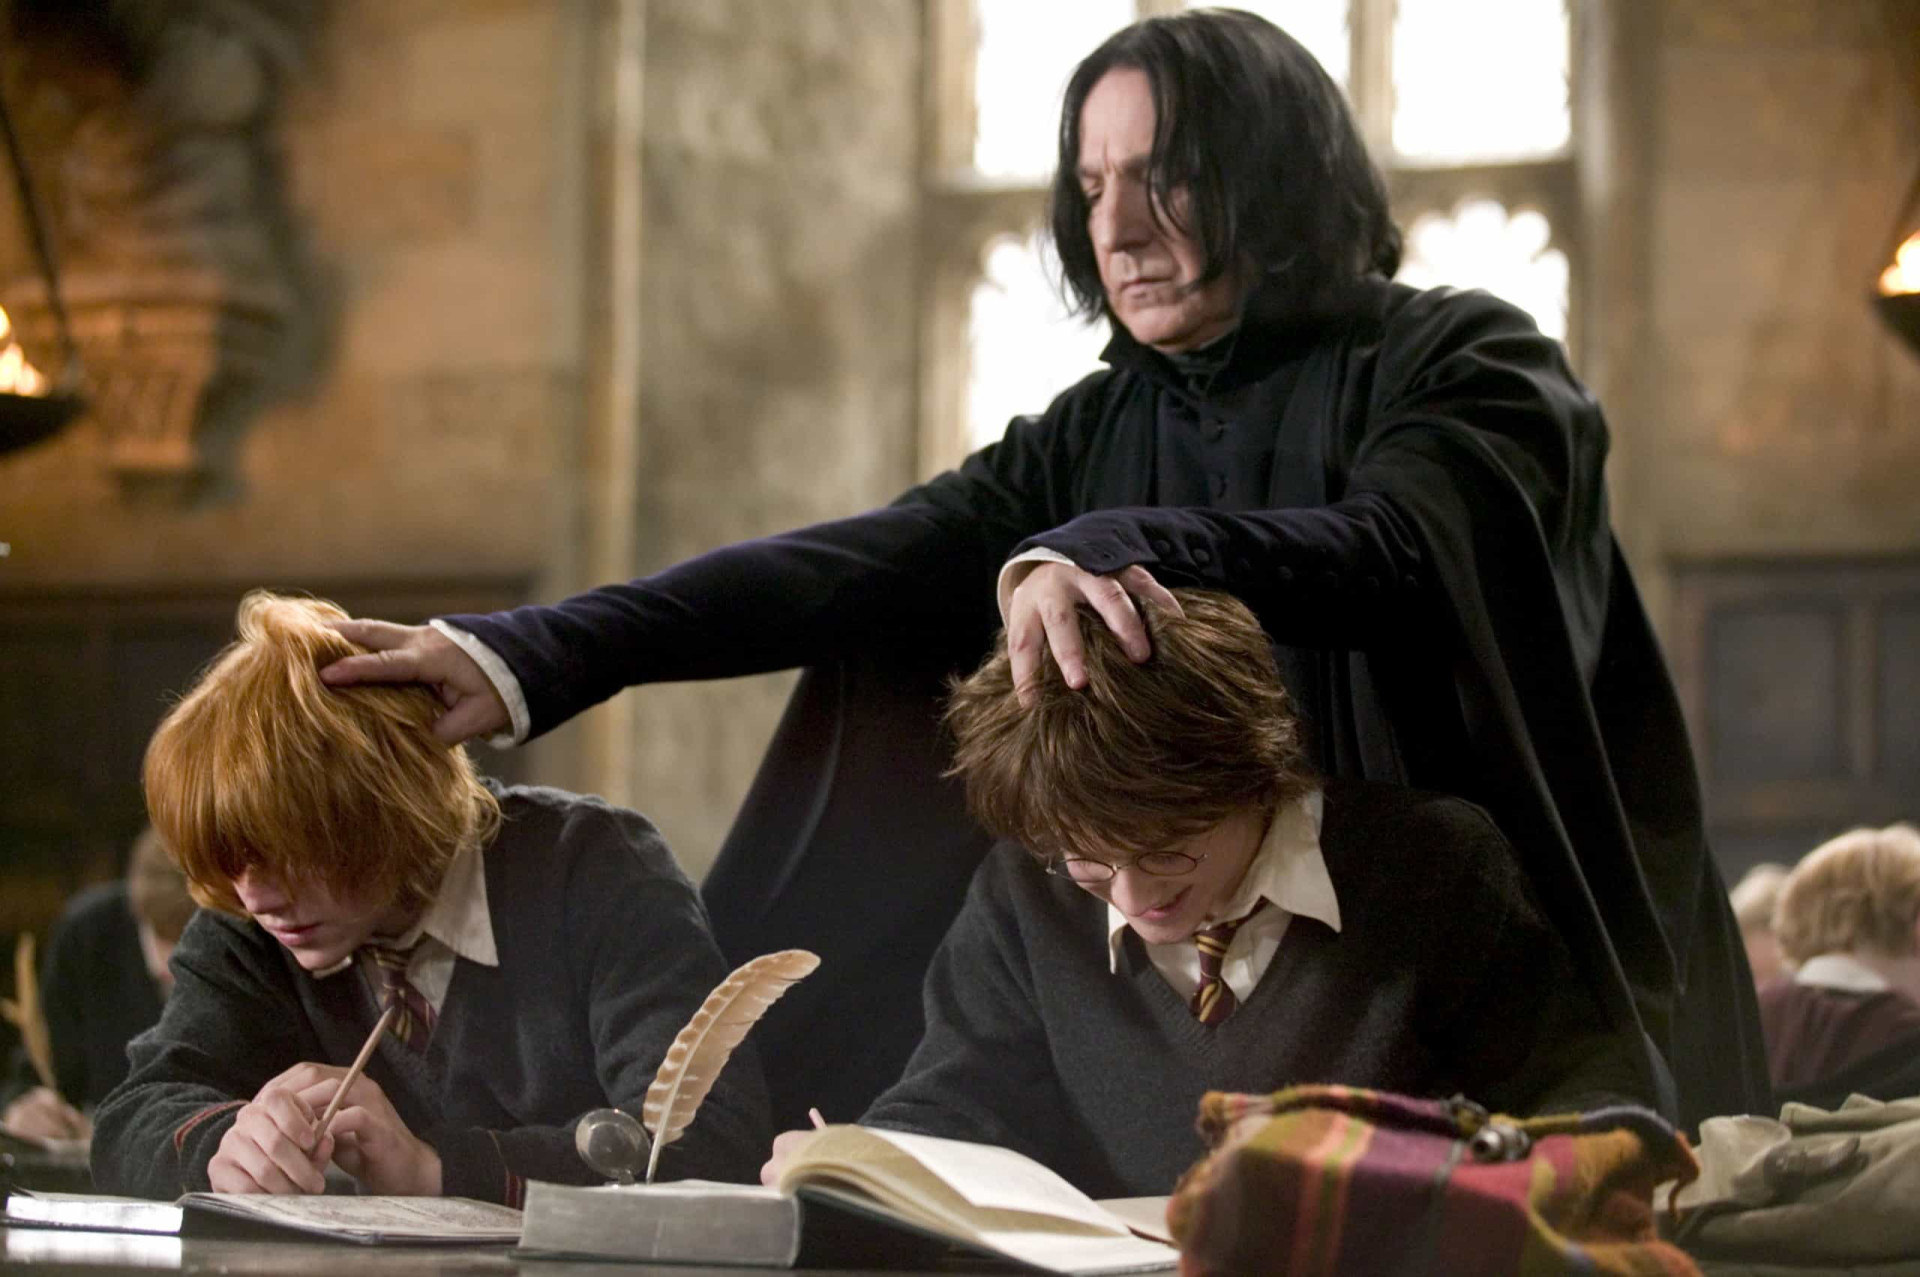 <p>Professor Snape was inspired by J.K. Rowling's old chemistry teacher. He taught at a school in Chepstow, Wales, where the author studied as a child.</p><p>You may also like:<a href="https://www.starsinsider.com/n/420114?utm_source=msn.com&utm_medium=display&utm_campaign=referral_description&utm_content=386265v16en-us"> Ask your partner these questions before getting married</a></p>